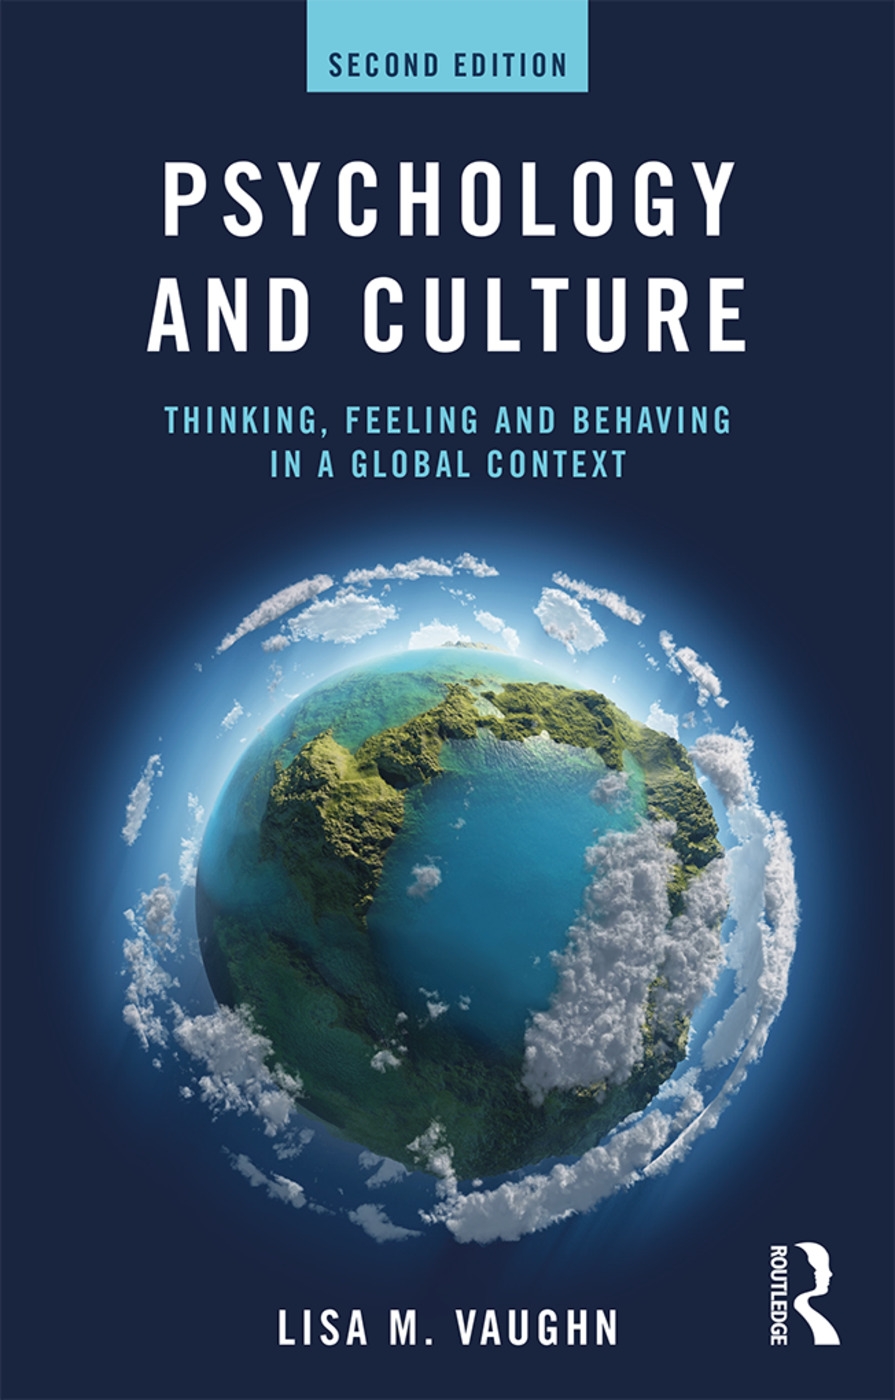 Psychology and Culture: Thinking, Feeling and Behaving in a Global Context